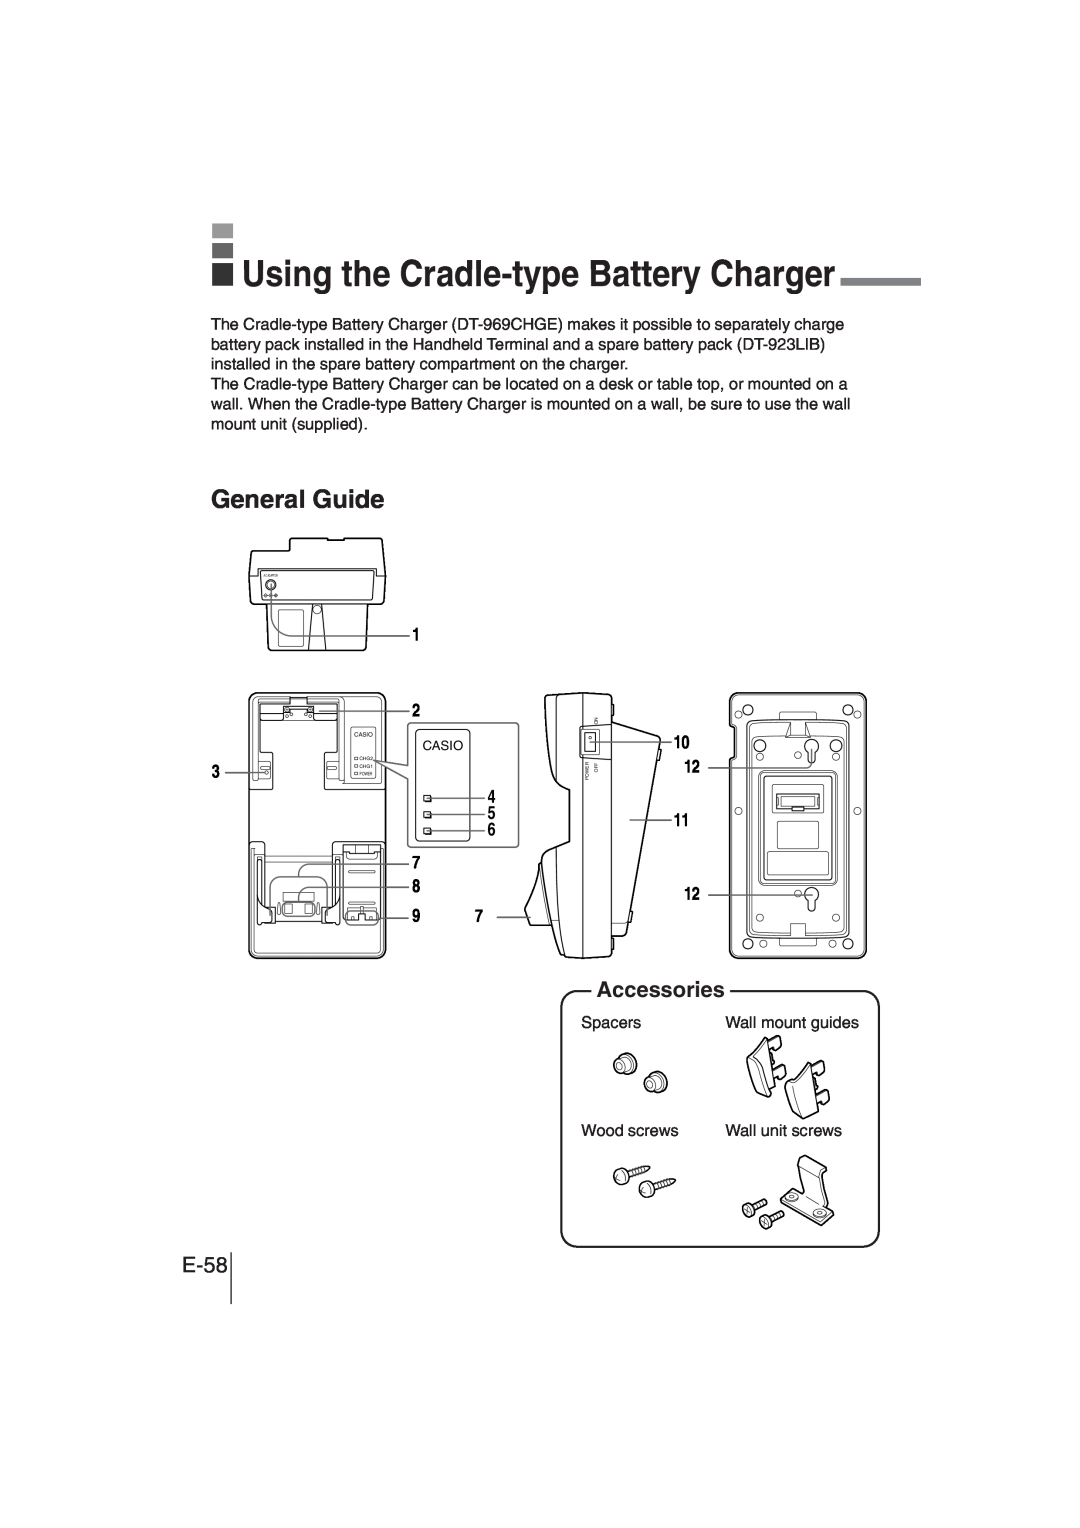 Casio DT-930 manual E-58, Using the Cradle-typeBattery Charger, General Guide, Accessories 